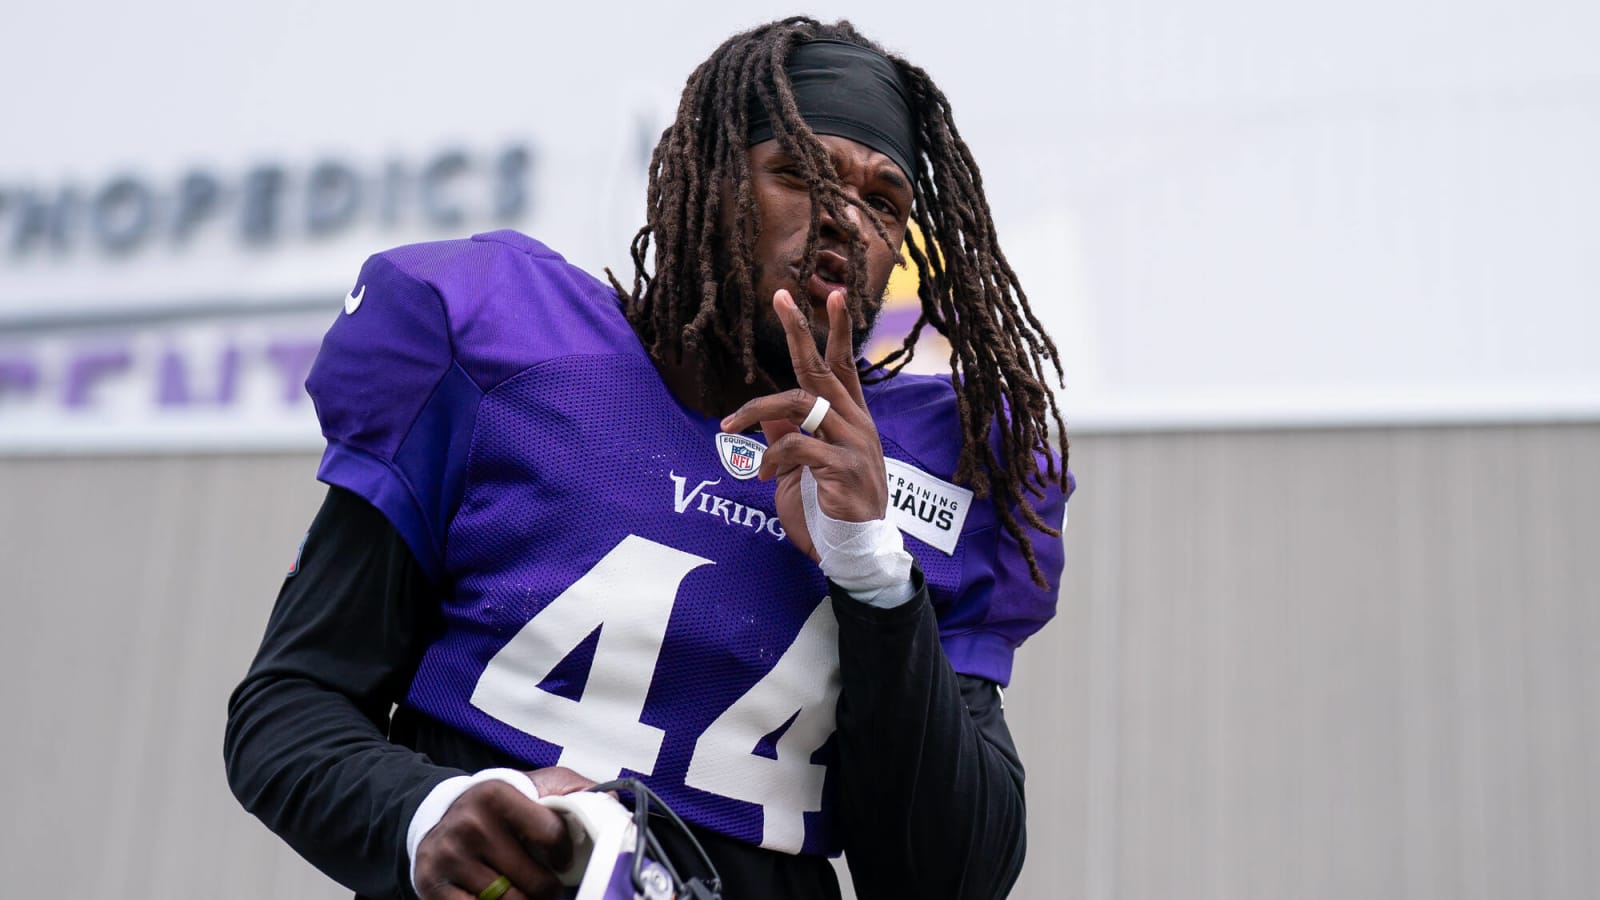  Minnesota Vikings Agree To Extension With 2020 Draft Pick, Team Captain